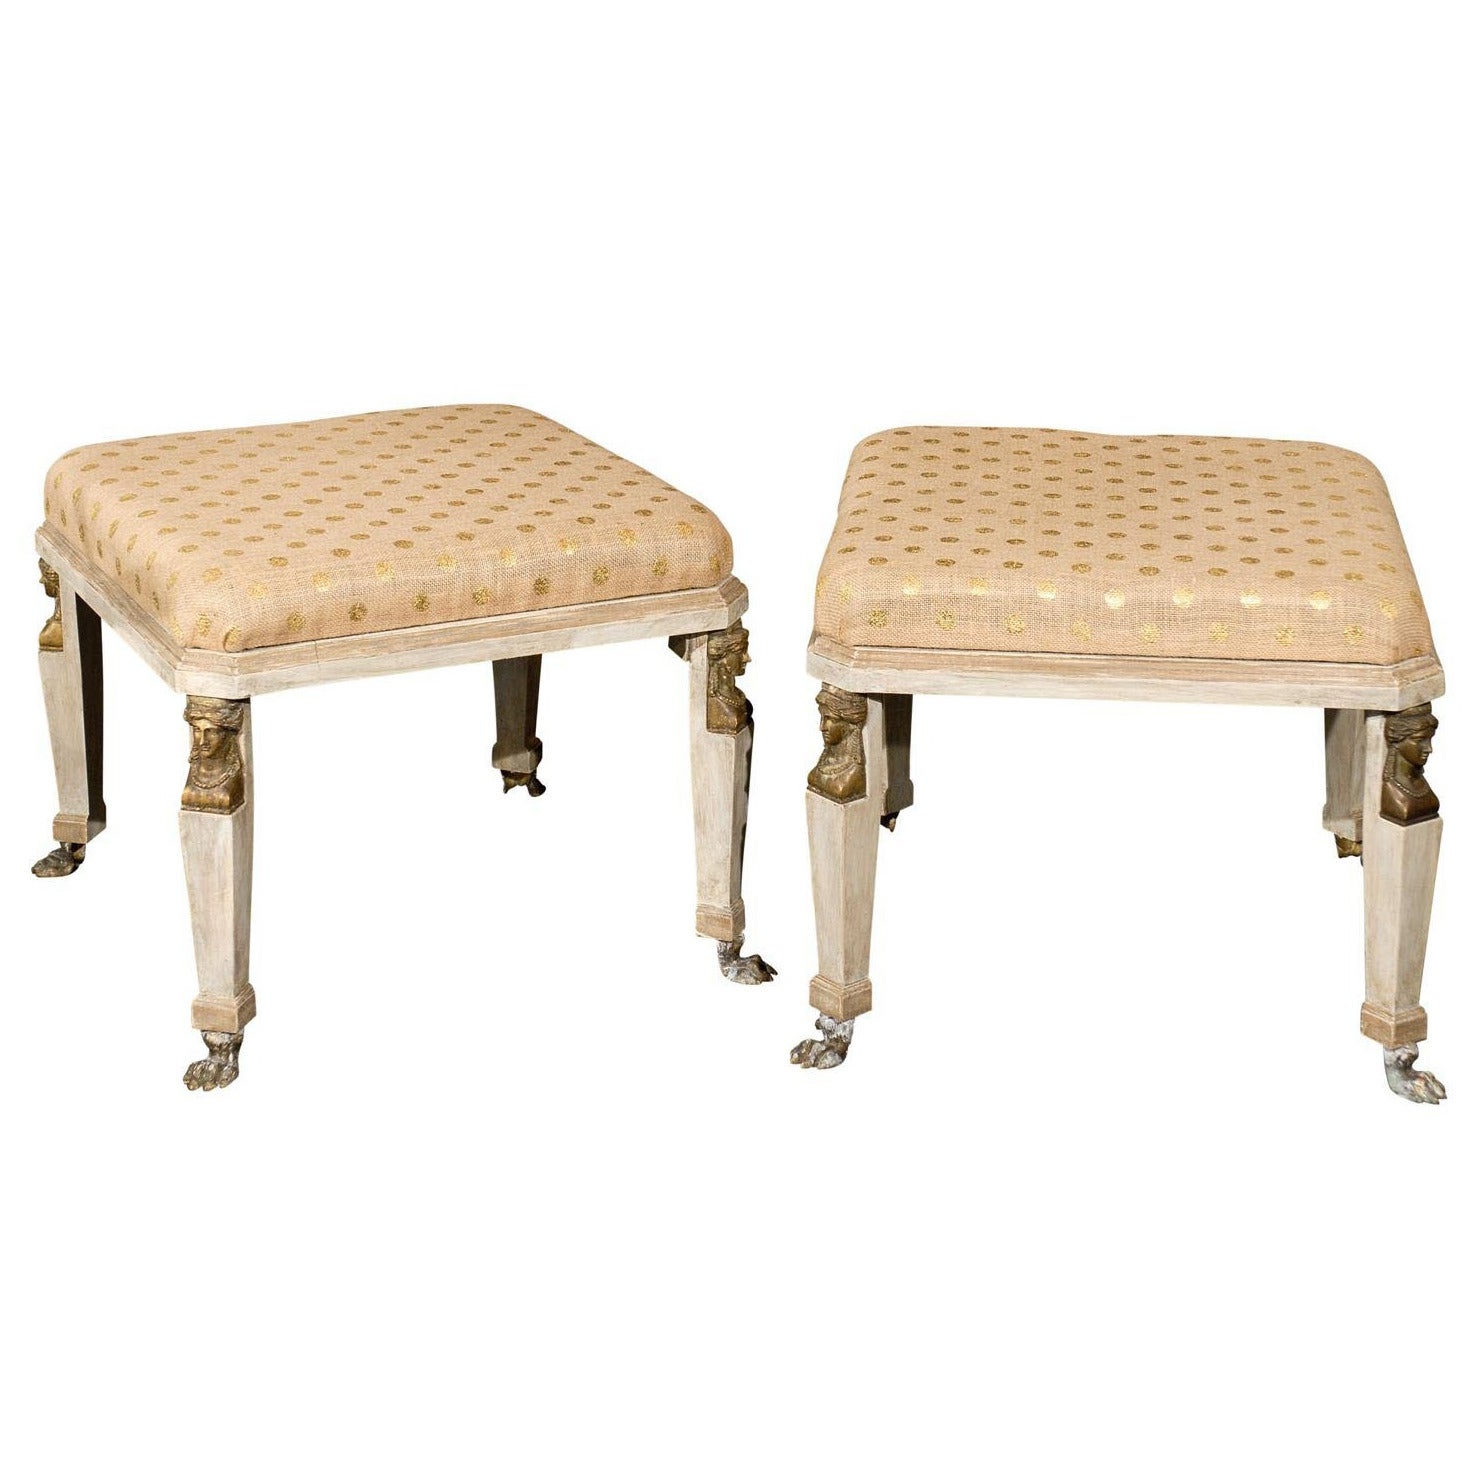 Pair of Neoclassical Style Upholstered Stools in Cream Color with Paw Feet